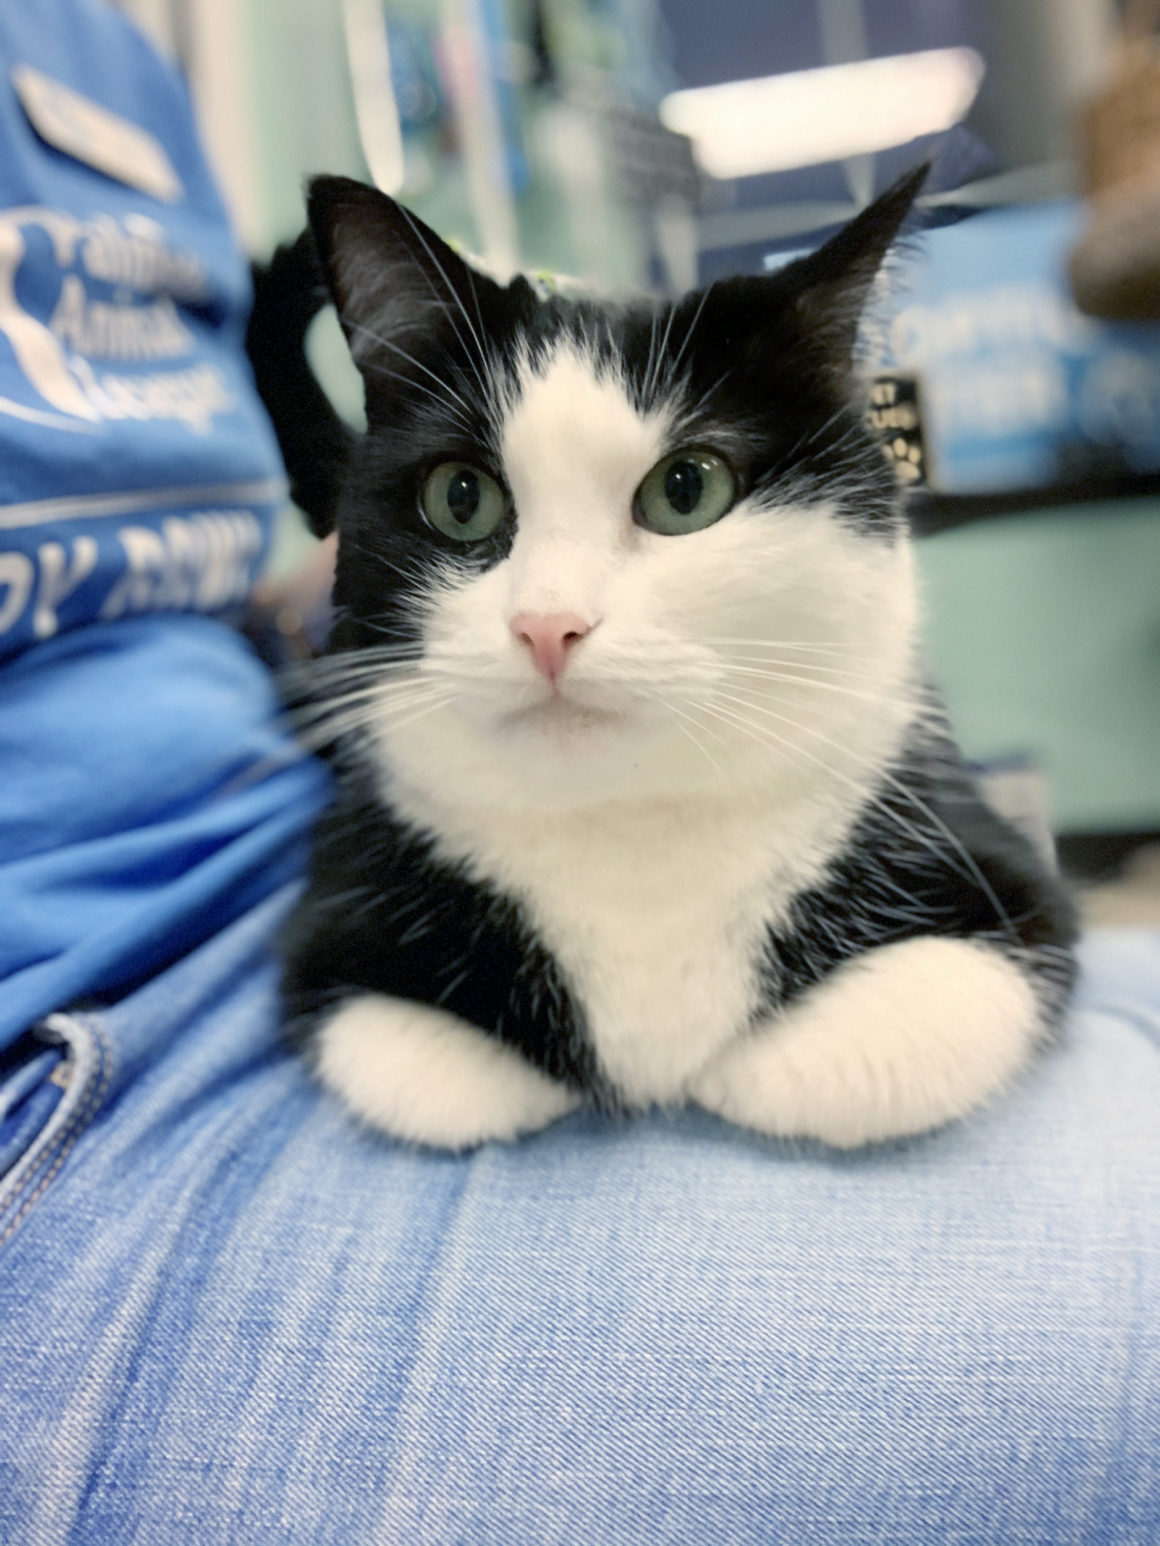 Cat longs to be adopted after 1,557 days at a local shelter